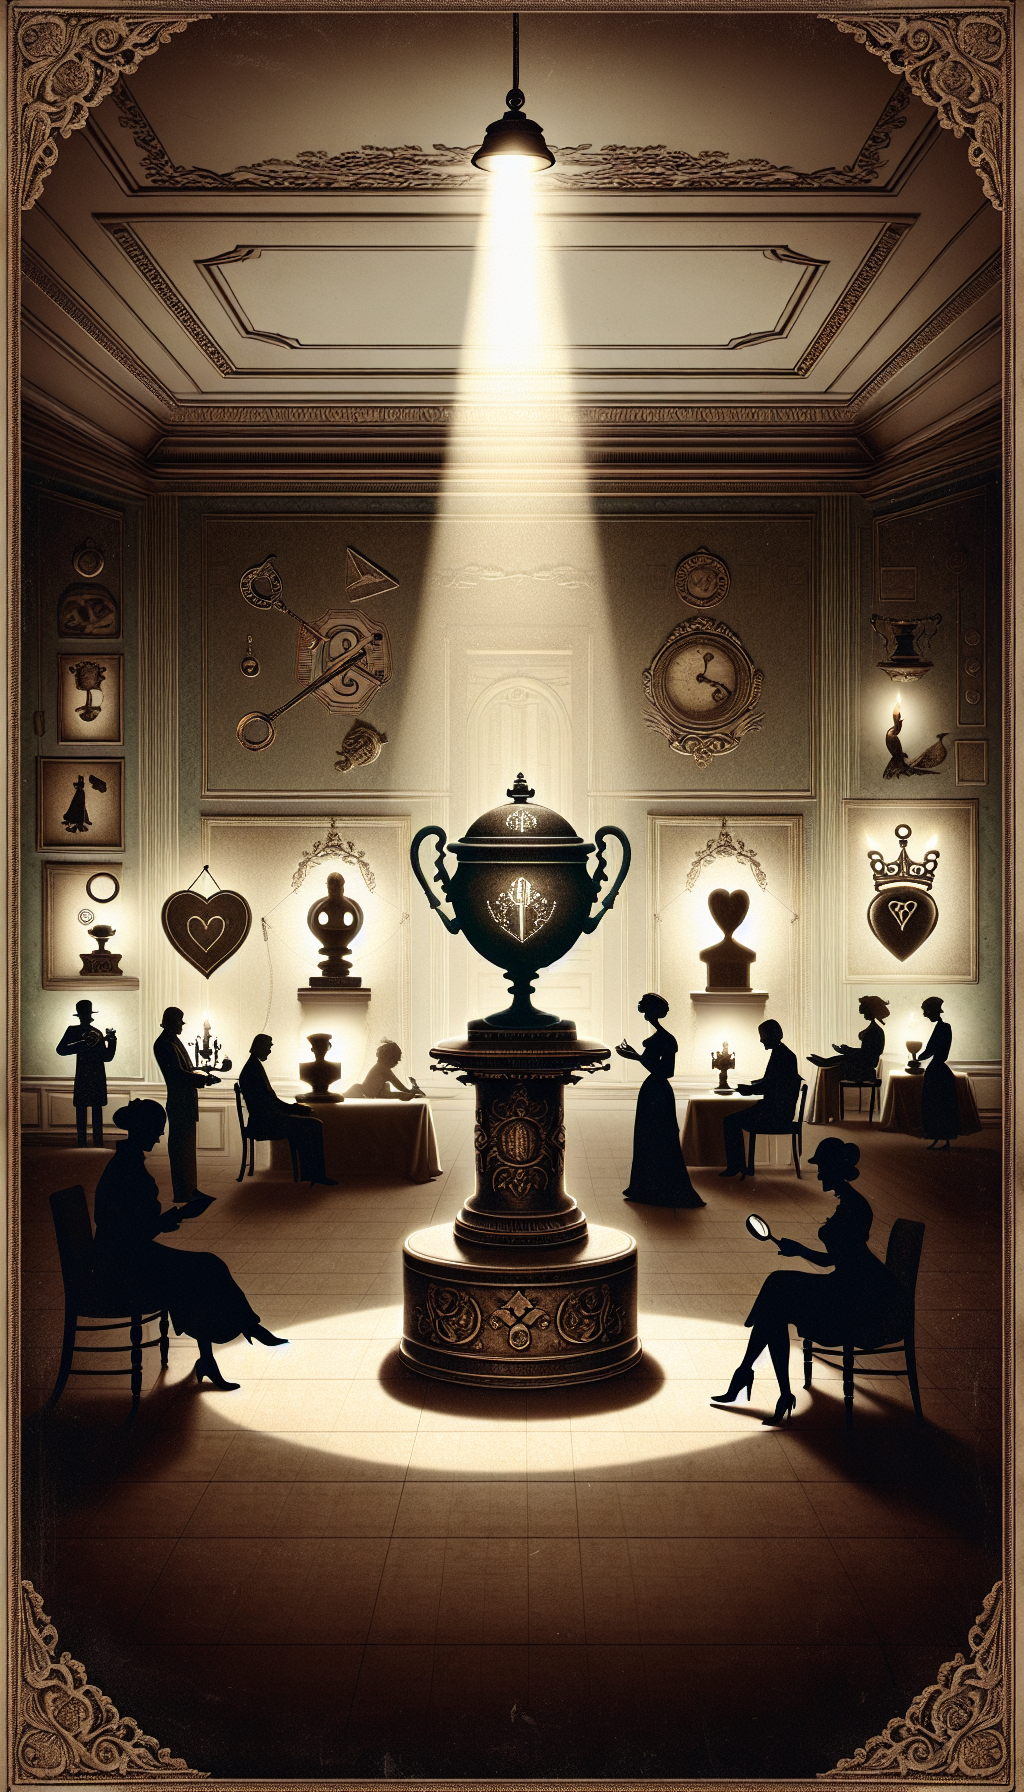 An opulent drawing room with a pedestal, upon which rests a vintage crock glowing like a jewel under a single dramatic spotlight, while a group of silhouetted figures with symbols of money, a heart, and a magnifying glass stand around it, indicating high value, love for collectibles, and the scrutiny of rarity. Vintage filigree marks the edges, emphasizing antiquity.